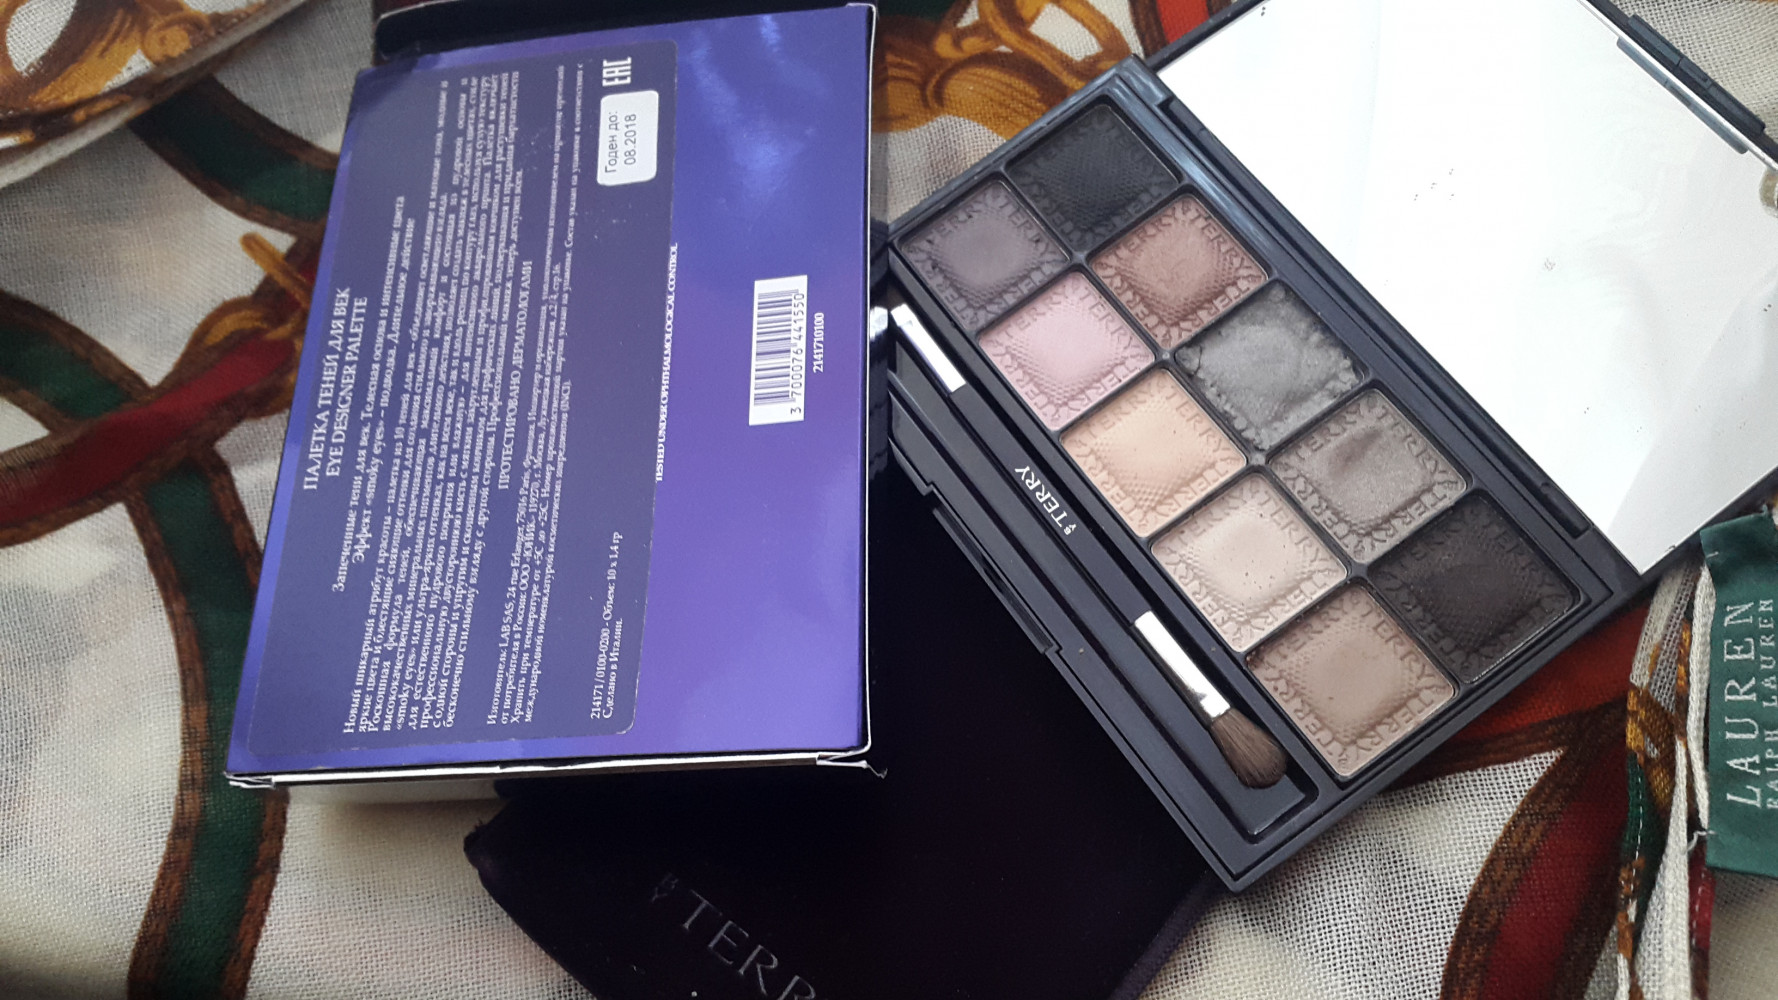 Tени By Terry Eye Designer Palette Smoky Nude 1